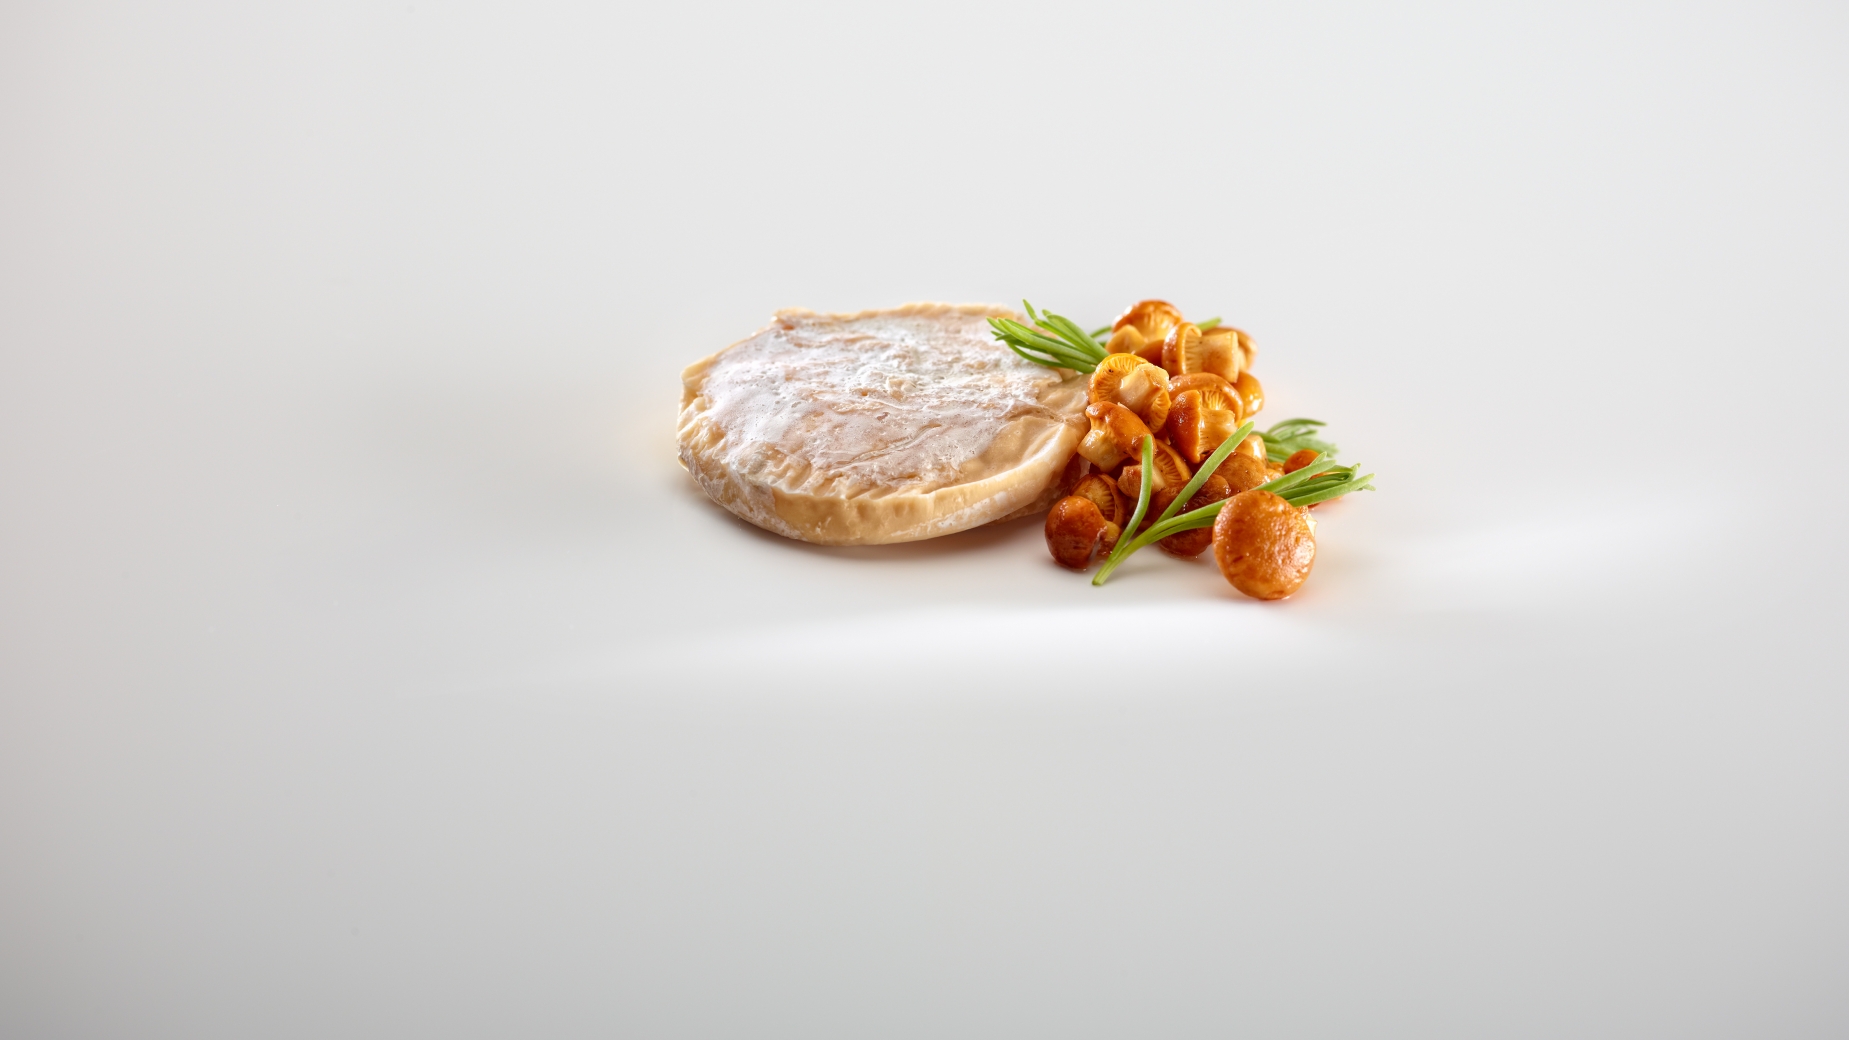 Portion of home-made cheese, cured in its own rind, mushrooms and fleshy leaves.
PHOTO: José Luis López de Zubiría / Mugaritz